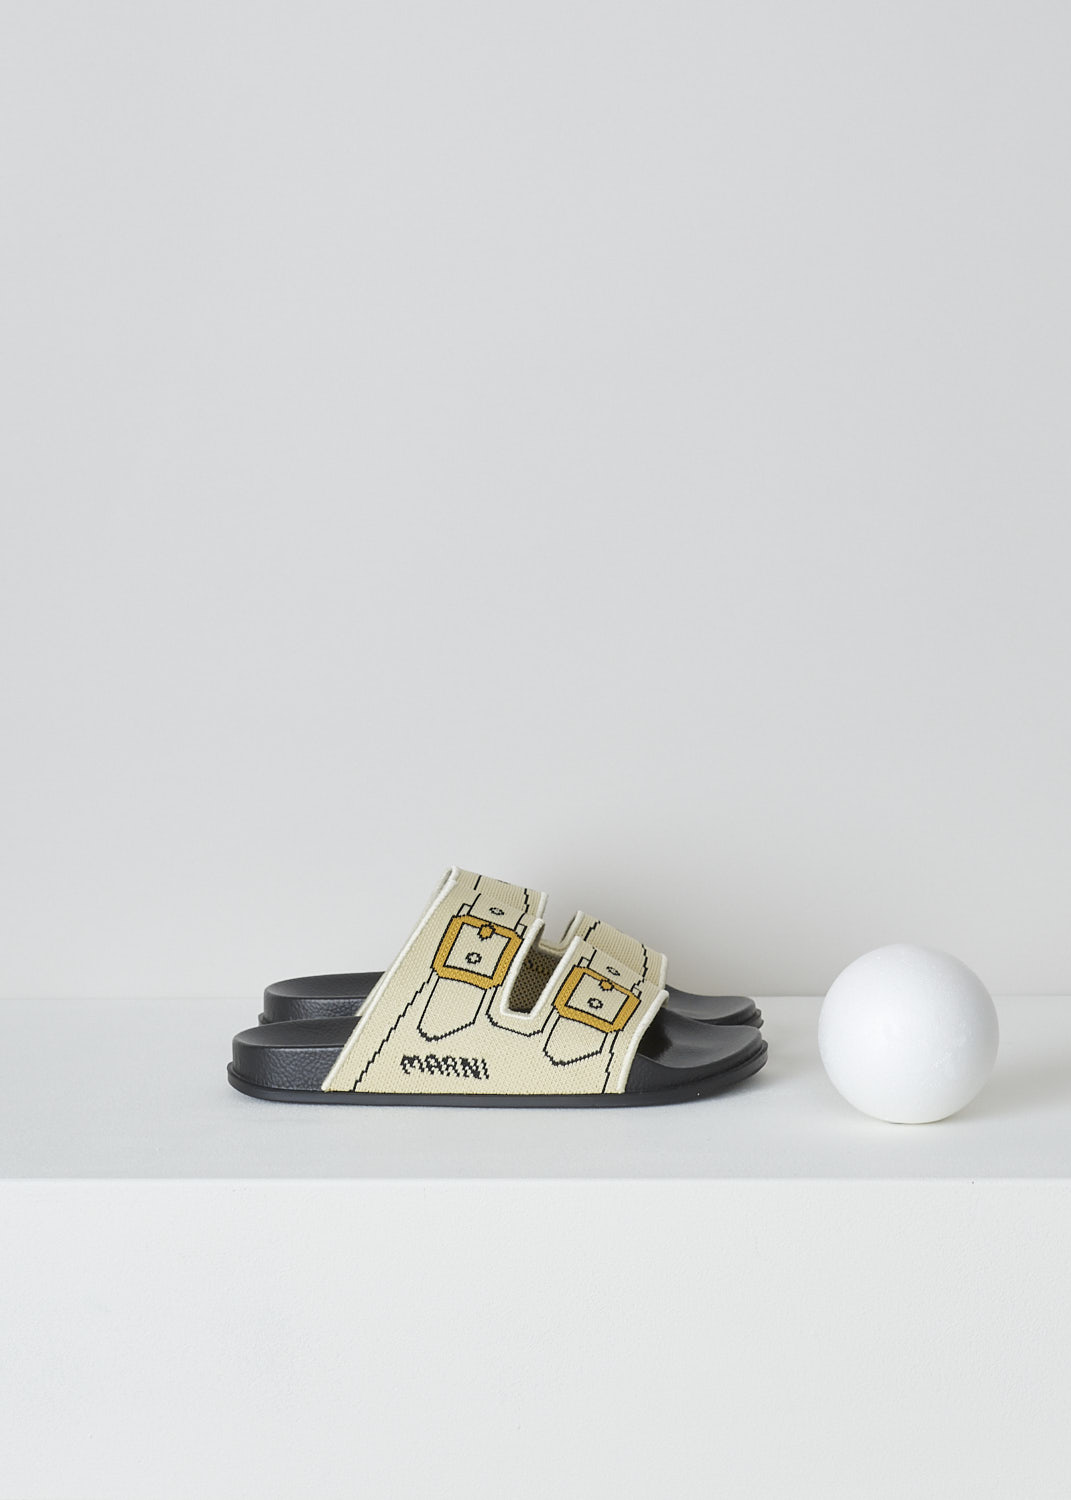 MARNIm OFF-WHITE TROMPE L'OEIL JACQUARD SLIDES, SAMS015802_P4547_ZO202, White, Side, These off-white knitted slides have a trompe l'oeil image woven into the straps across the vamp. The image depicts straps with gold buckles. The brand's logo is woven into the side. These slip-on slides have a round open toe. The slides have a molded footbed and a flat rubber sole. 